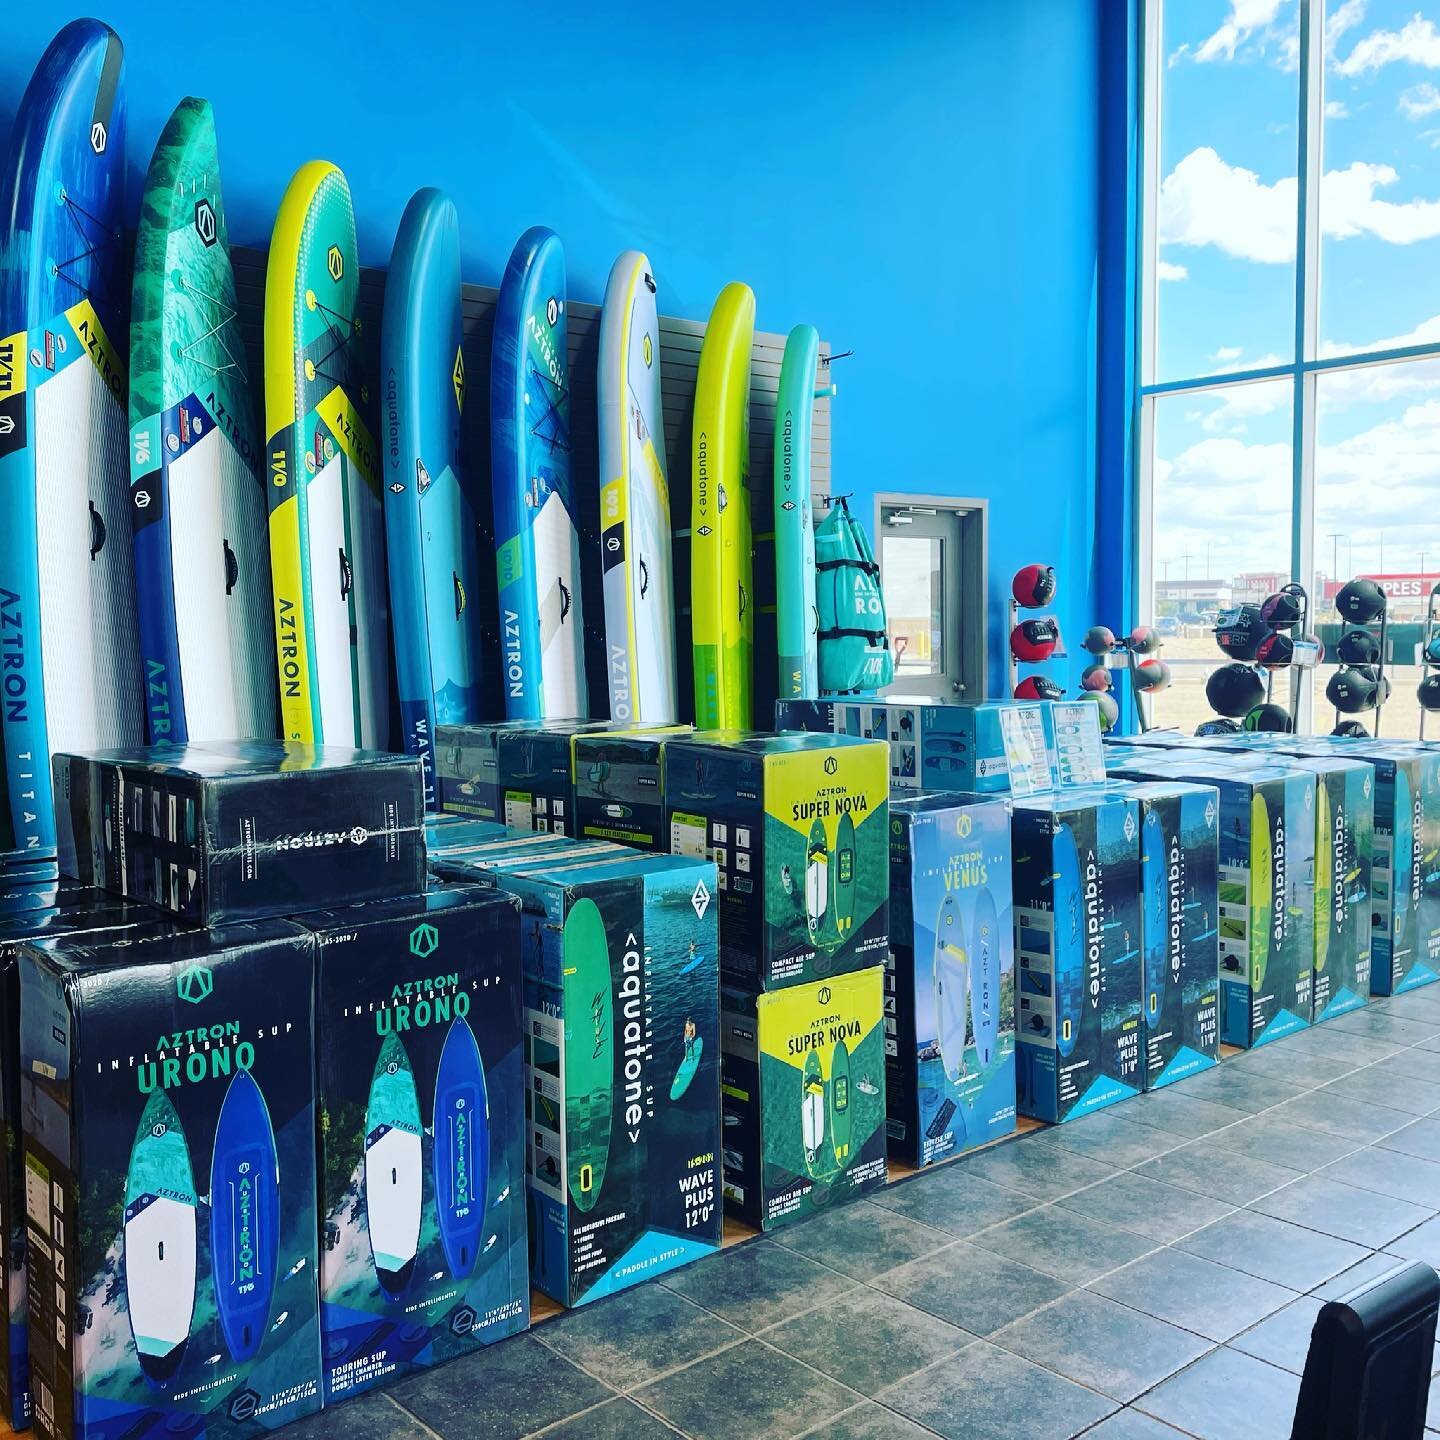 New stock!!! Come in this week and buy or rent a board before they are sold! Prices starting as 549$!! #Summervibes!! ☀️🔥🔥🔥🔥☀️☀️☀️ we are open Monday-Friday 10-6 Saturday 10-5 (closed 🇨🇦 Canada day!)